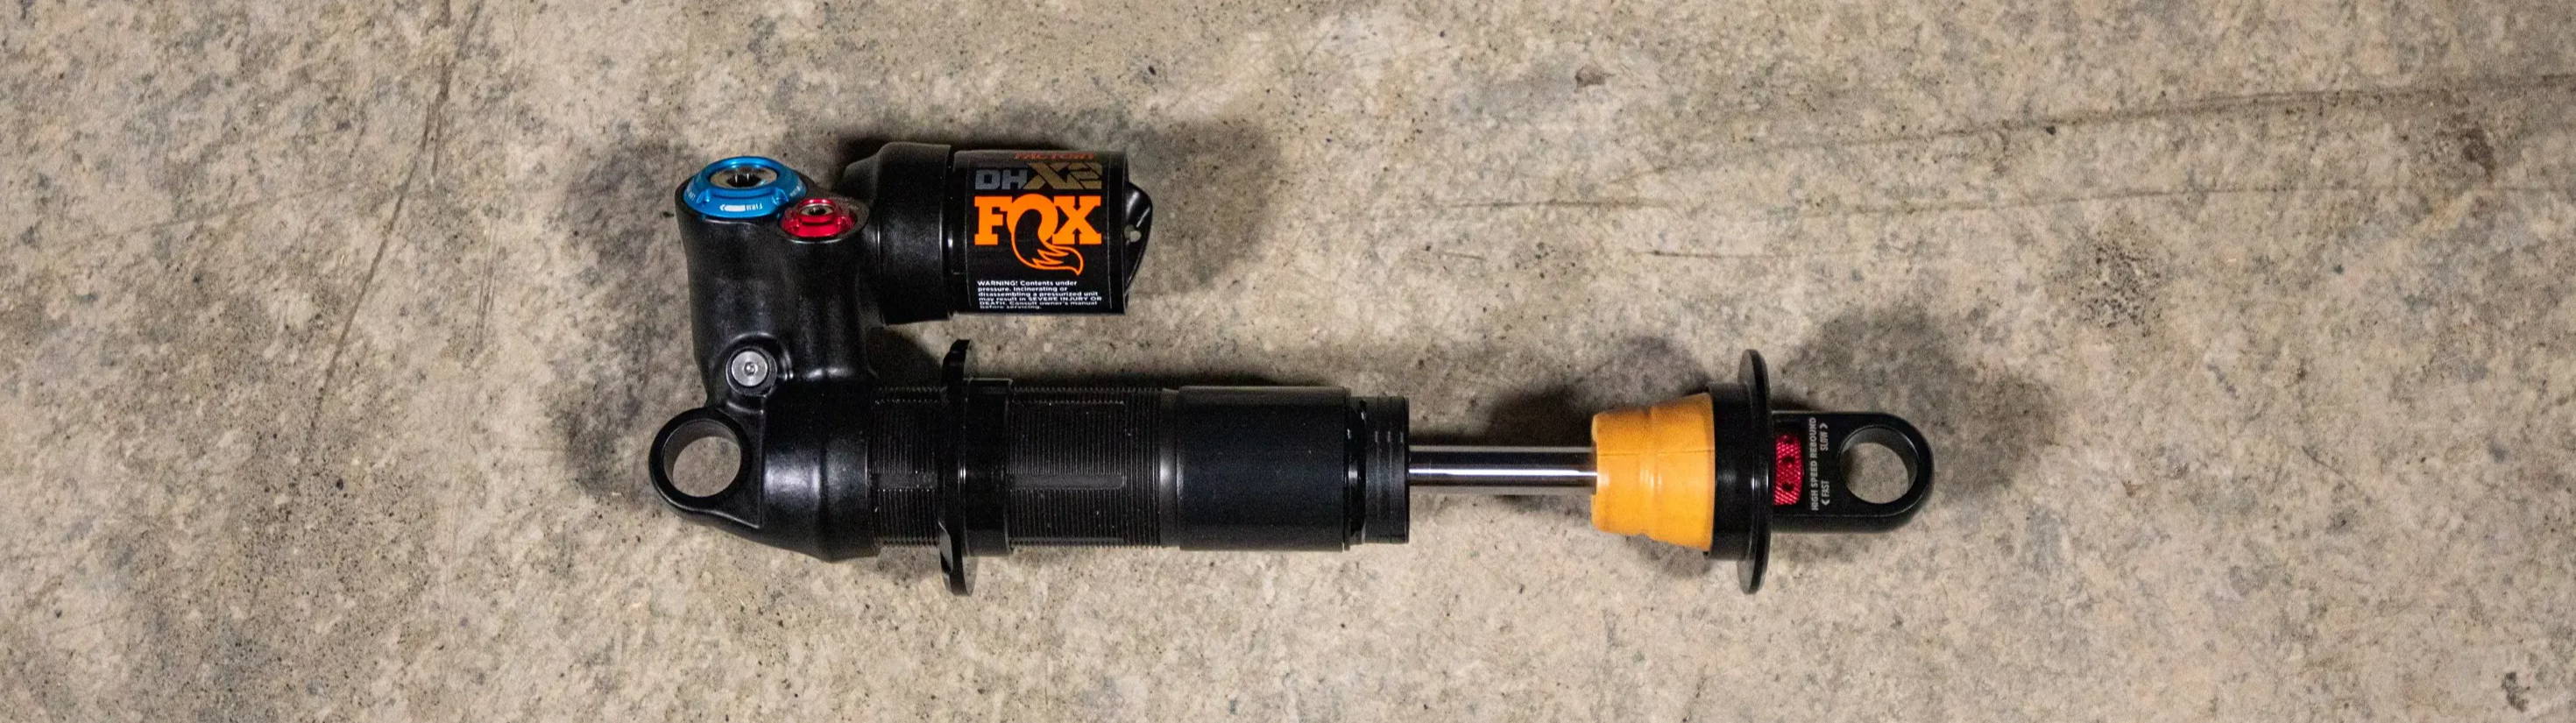 Fox DHX2 mountain bike rear shock with no spring on the floor